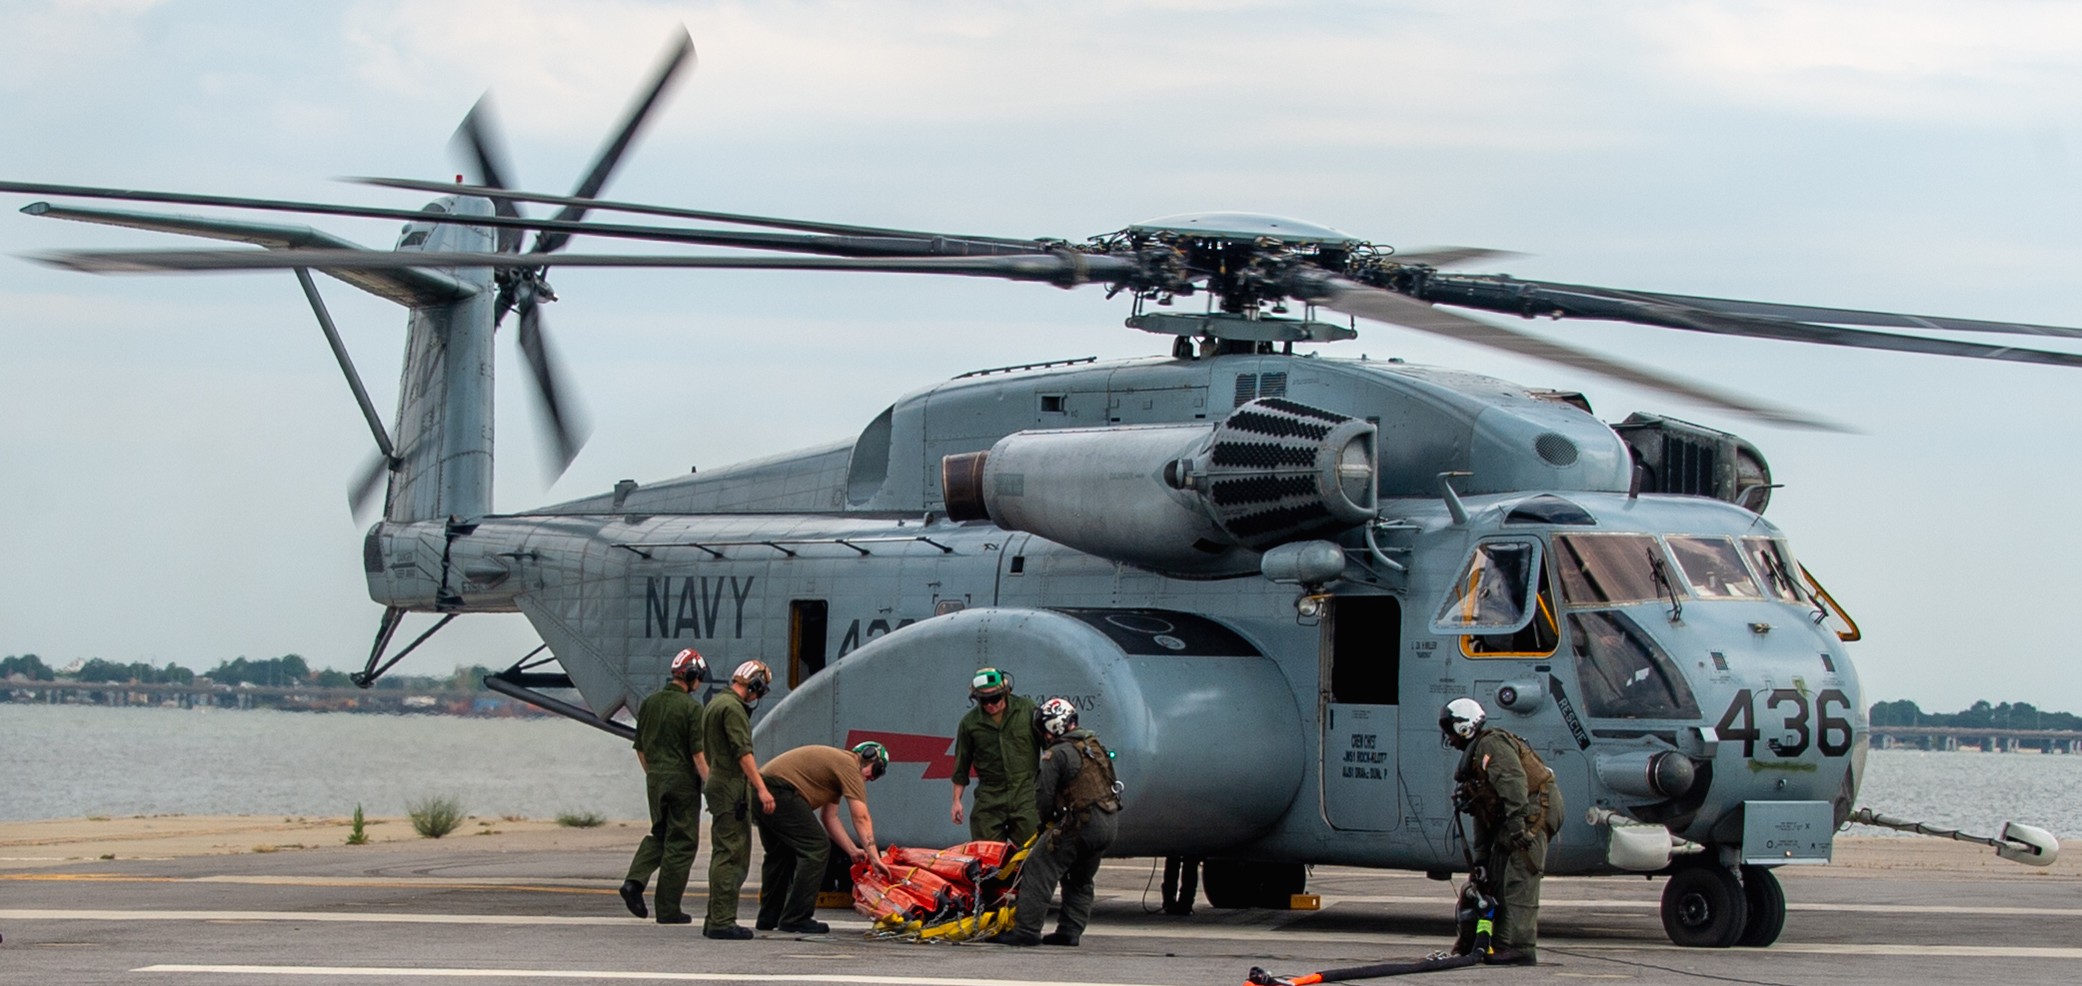 hm-12 sea dragons helicopter mine countermeasures squadron navy mh-53d norfolk virginia 43